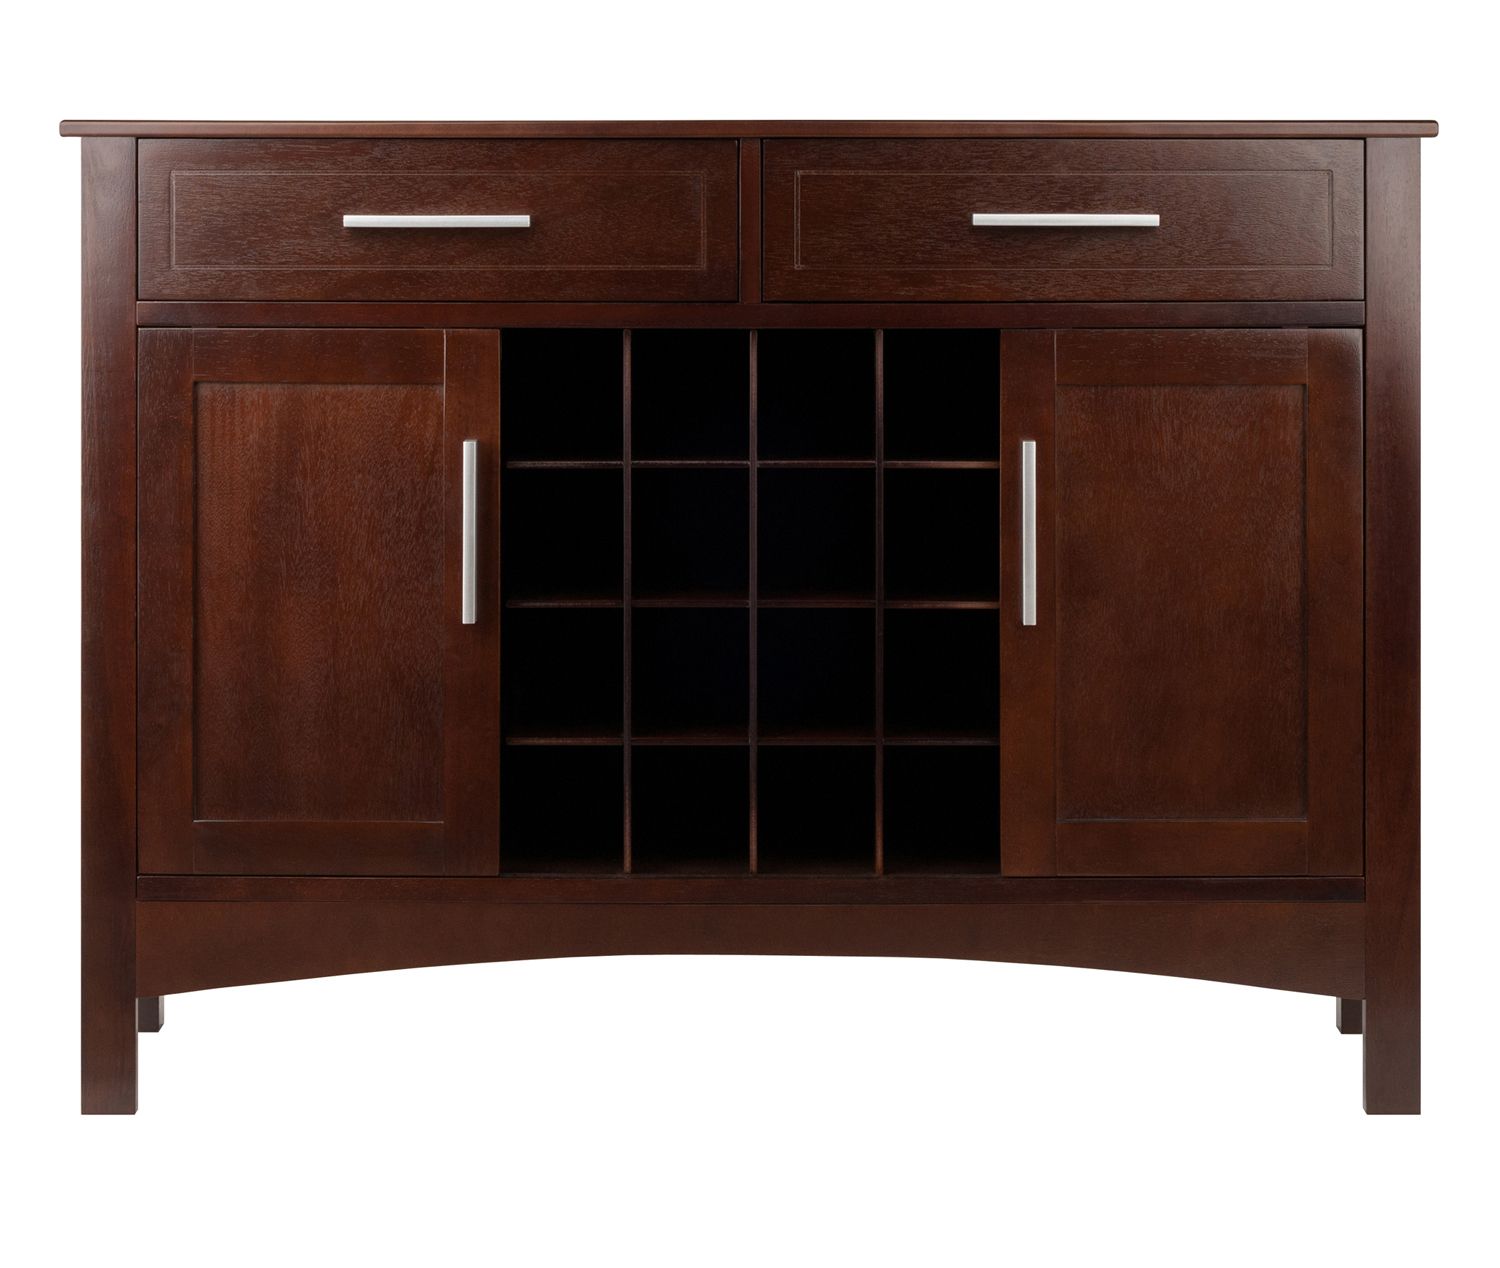 Winsome Gordon Solid And Composite Wood Buffet Cabinet/sideboard –  Cappuccino Finish Intended For Solid And Composite Wood Buffets In Cappuccino Finish (View 3 of 30)